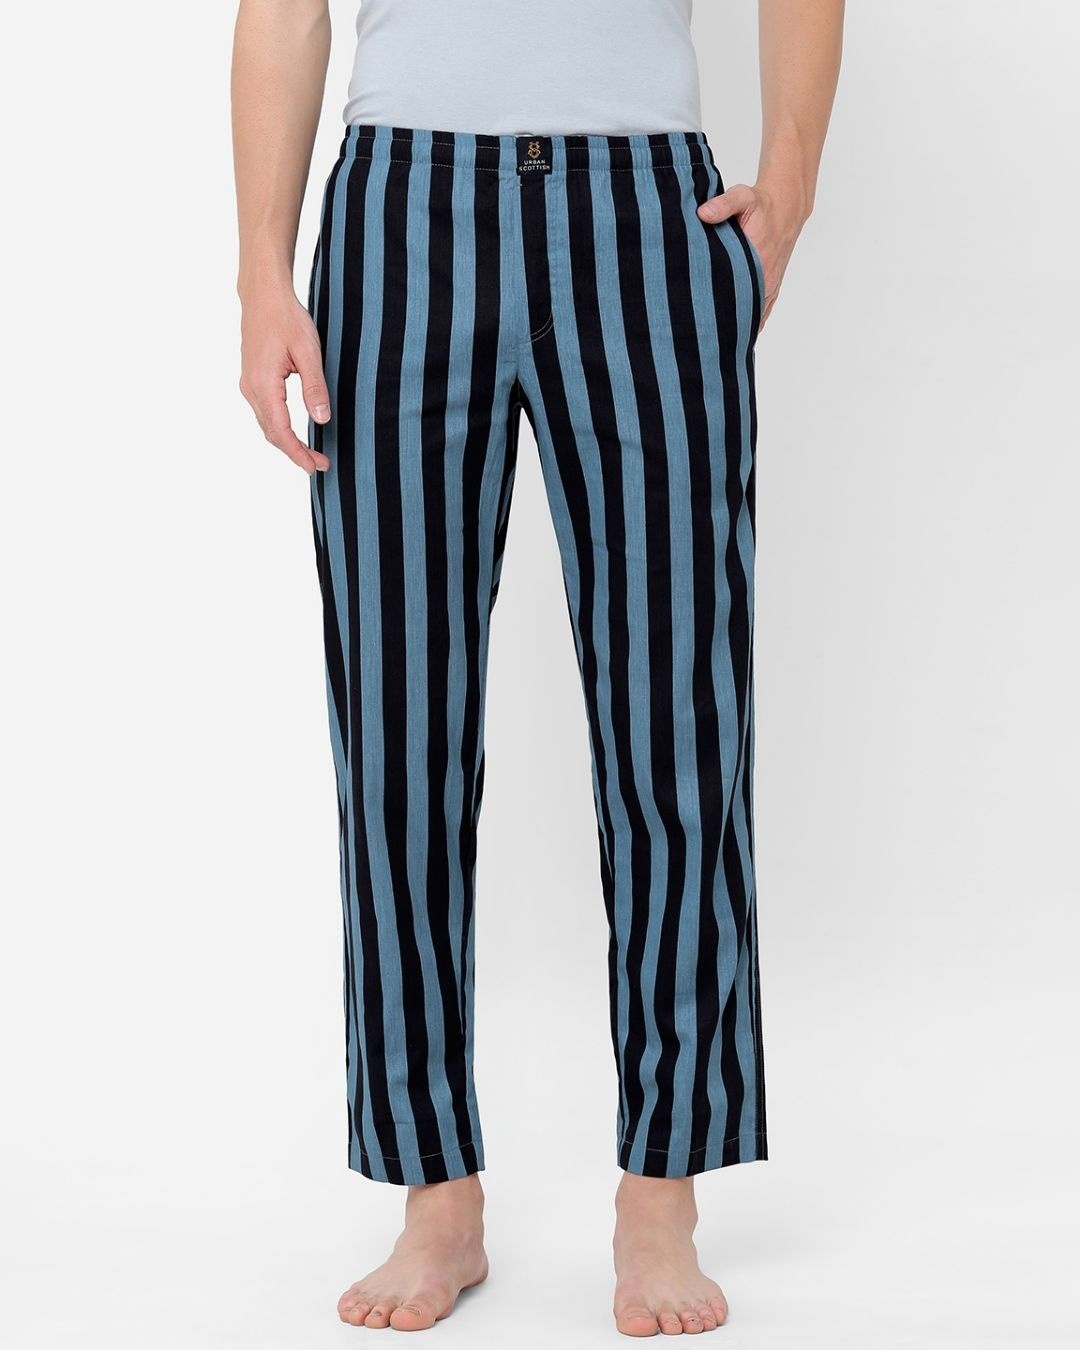 Buy Navy Blue White Stripe Men Pant Cotton Handloom for Best Price,  Reviews, Free Shipping